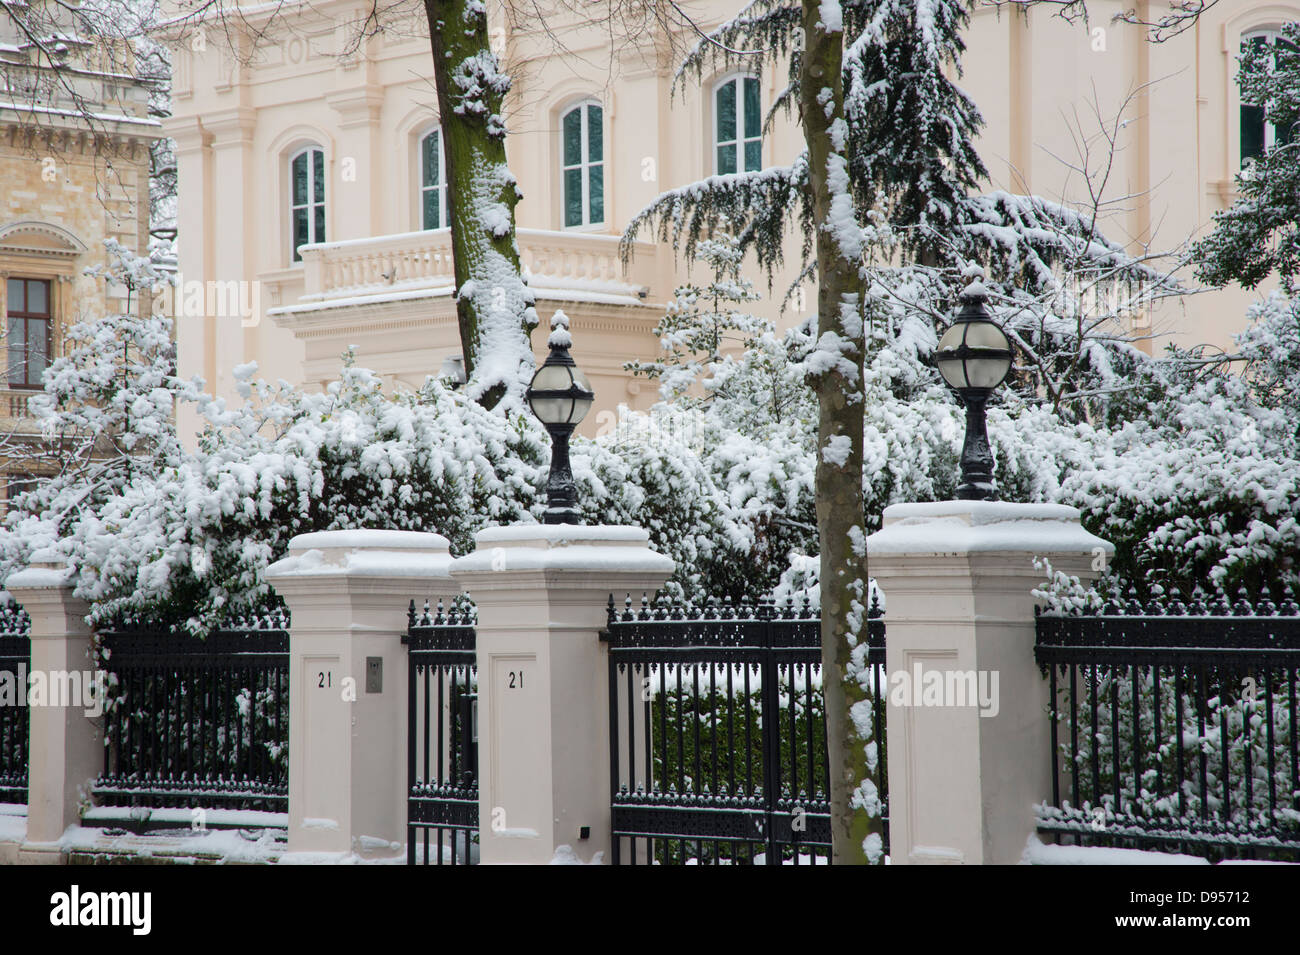 Snow on trees in front of grand mansions in Palace Gate, London, UK Stock Photo